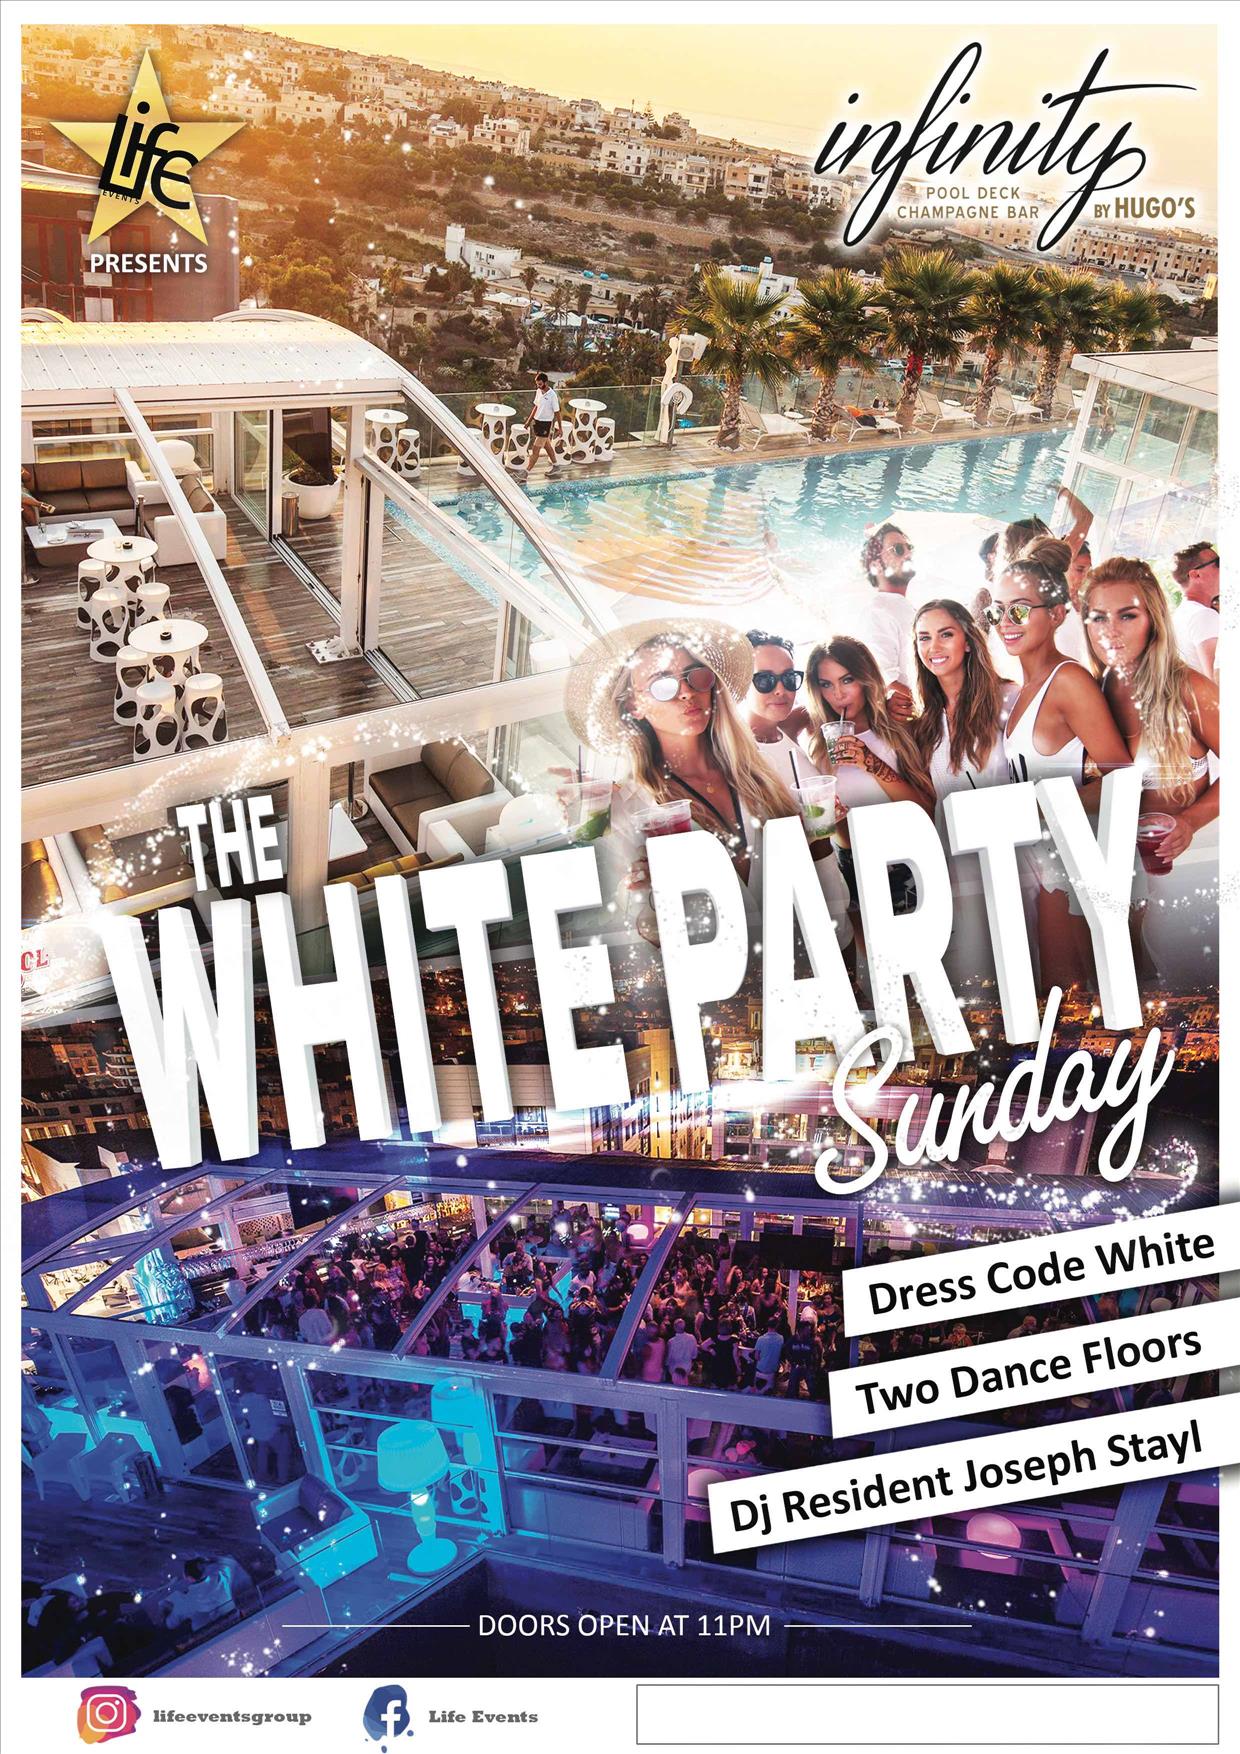 The White Party Malta By Life Events poster